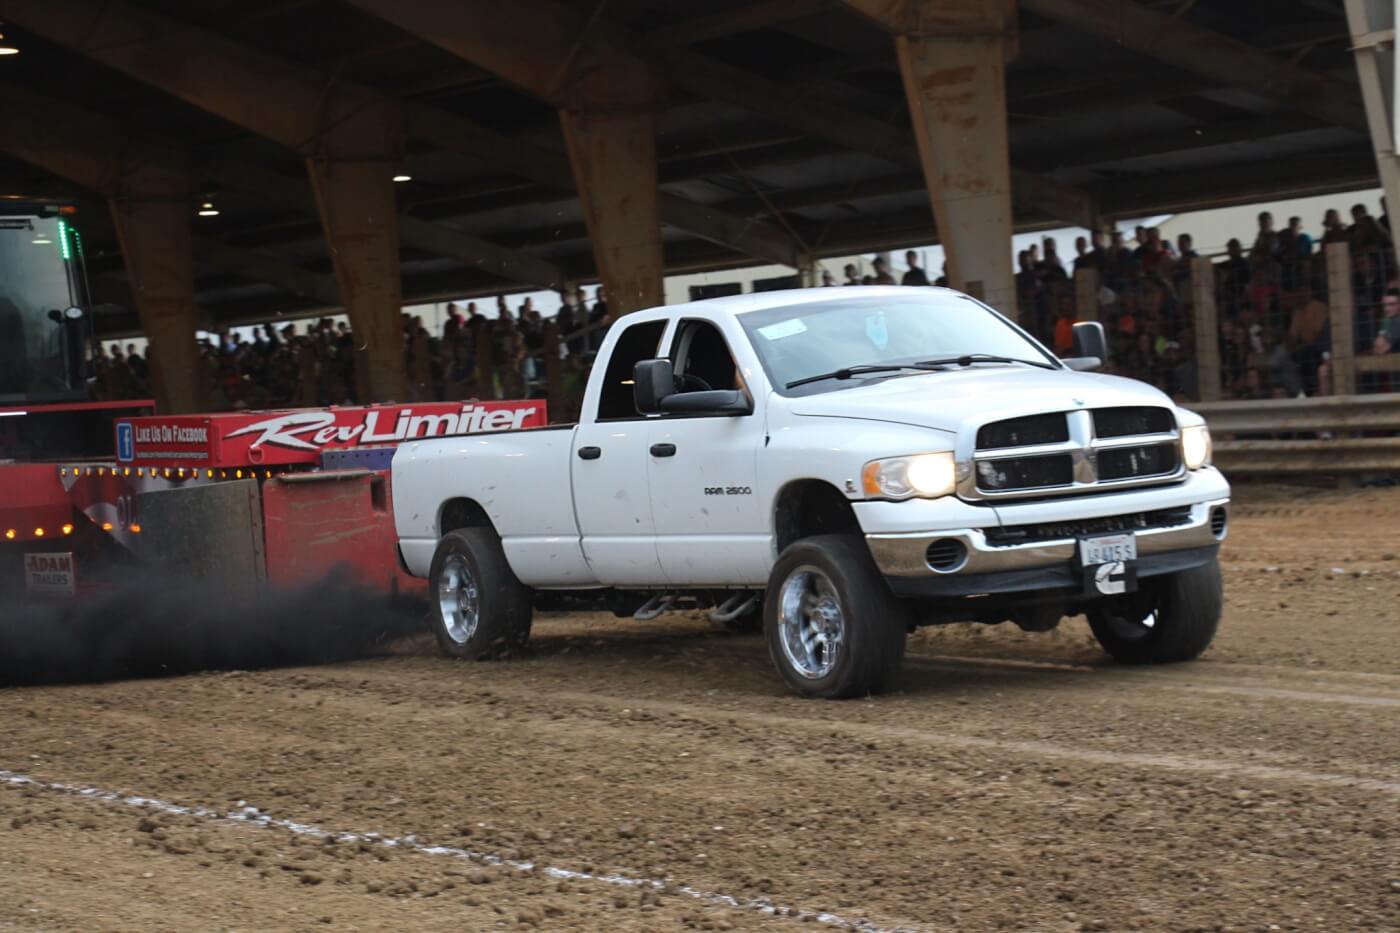 Due to the factory compound turbocharger arrangement on 6.4L powered Fords and a considerably sized factory turbo on Duramax mills, it’s sometimes hard for the Cummins crowd to keep up in a stock turbo class. However, Garret Stewart’s ’04 Dodge put in a strong effort against the Bow Tie and Blue Oval competition, finishing Fourth overall.